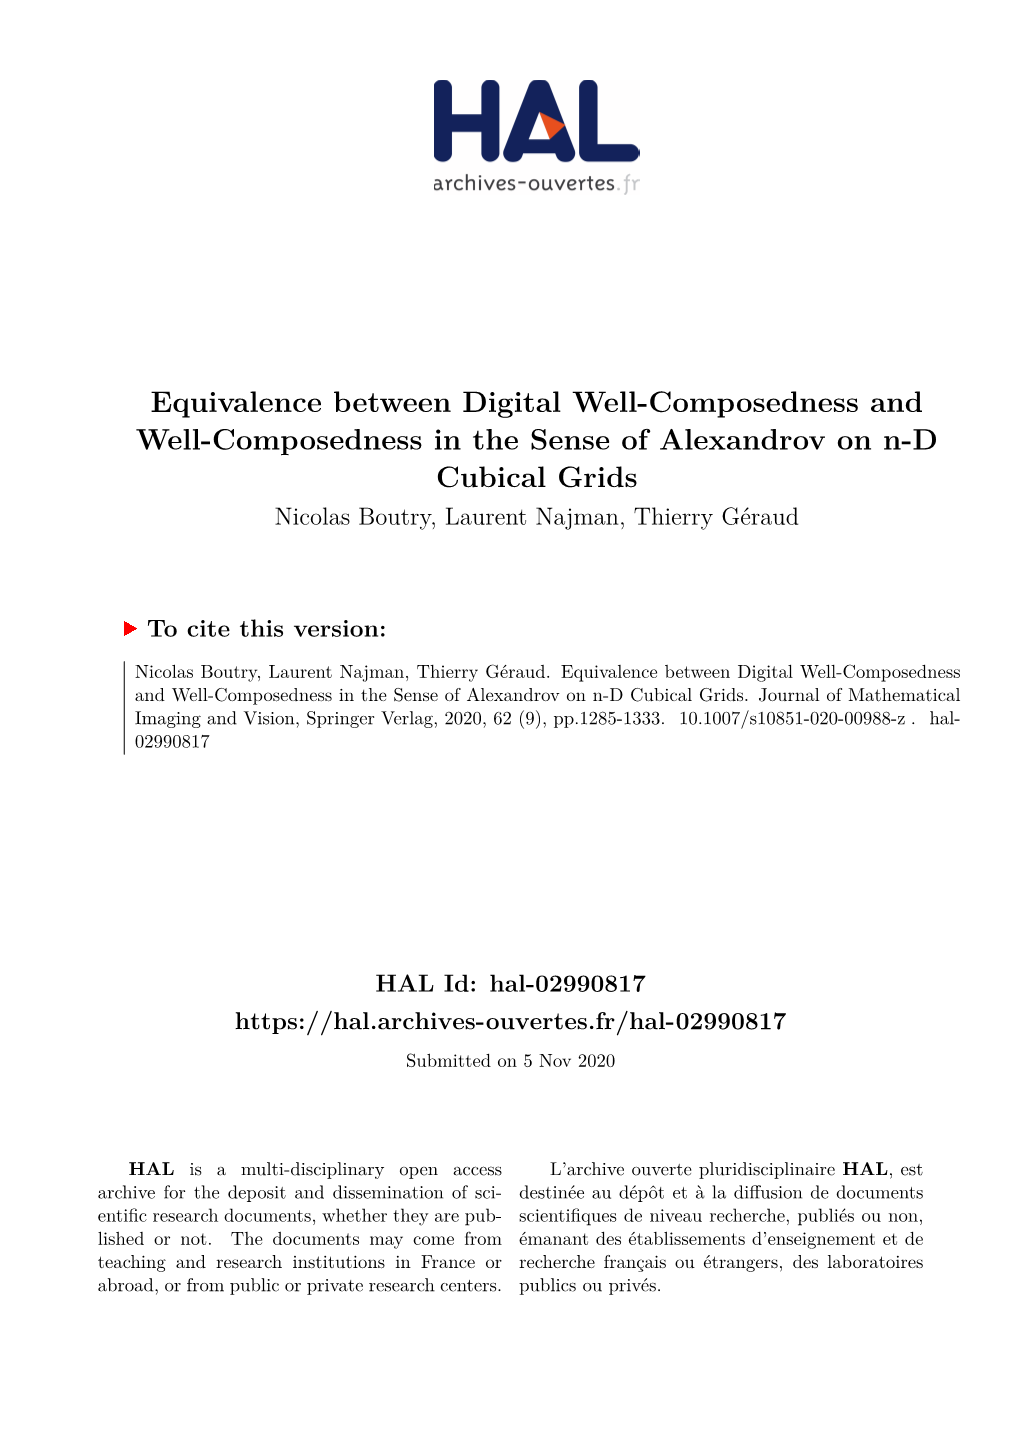 Equivalence Between Digital Well-Composedness and Well-Composedness in the Sense of Alexandrov on N-D Cubical Grids Nicolas Boutry, Laurent Najman, Thierry Géraud